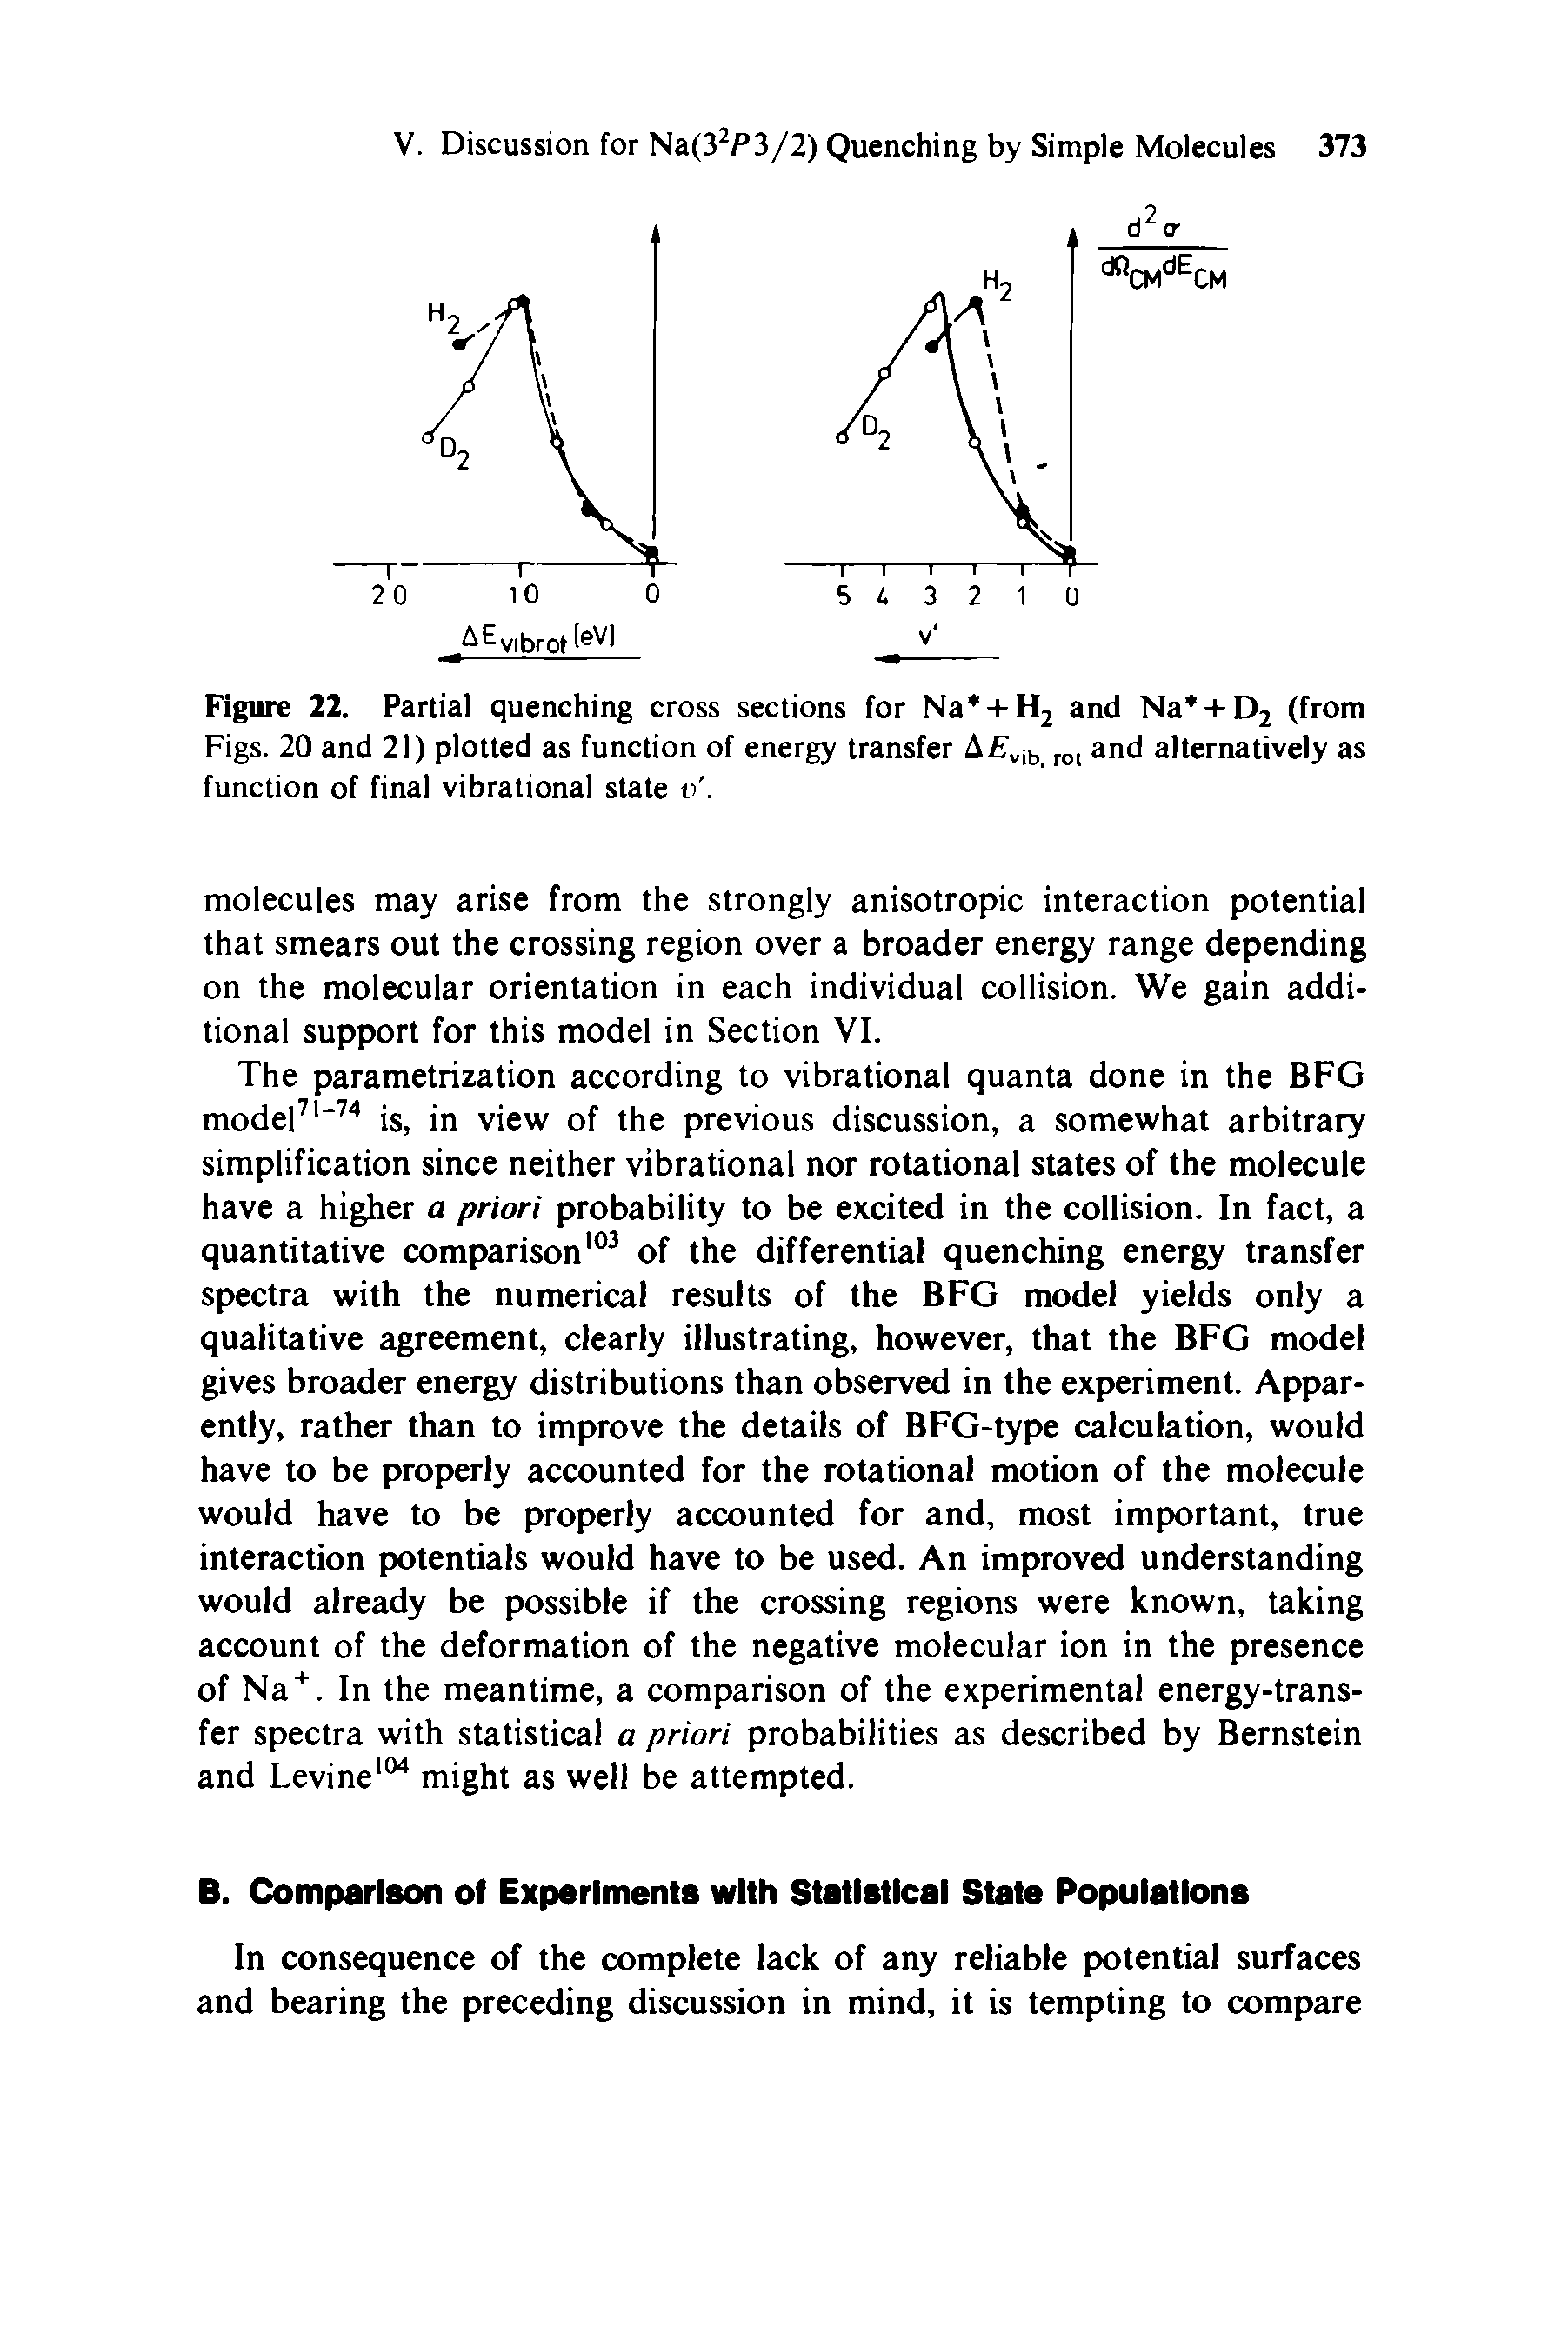 Figure 22. Partial quenching cross sections for Na + H2 and Na + D2 (from Figs. 20 and 21) plotted as function of energy transfer A vib rol and alternatively as function of final vibrational state v. ...